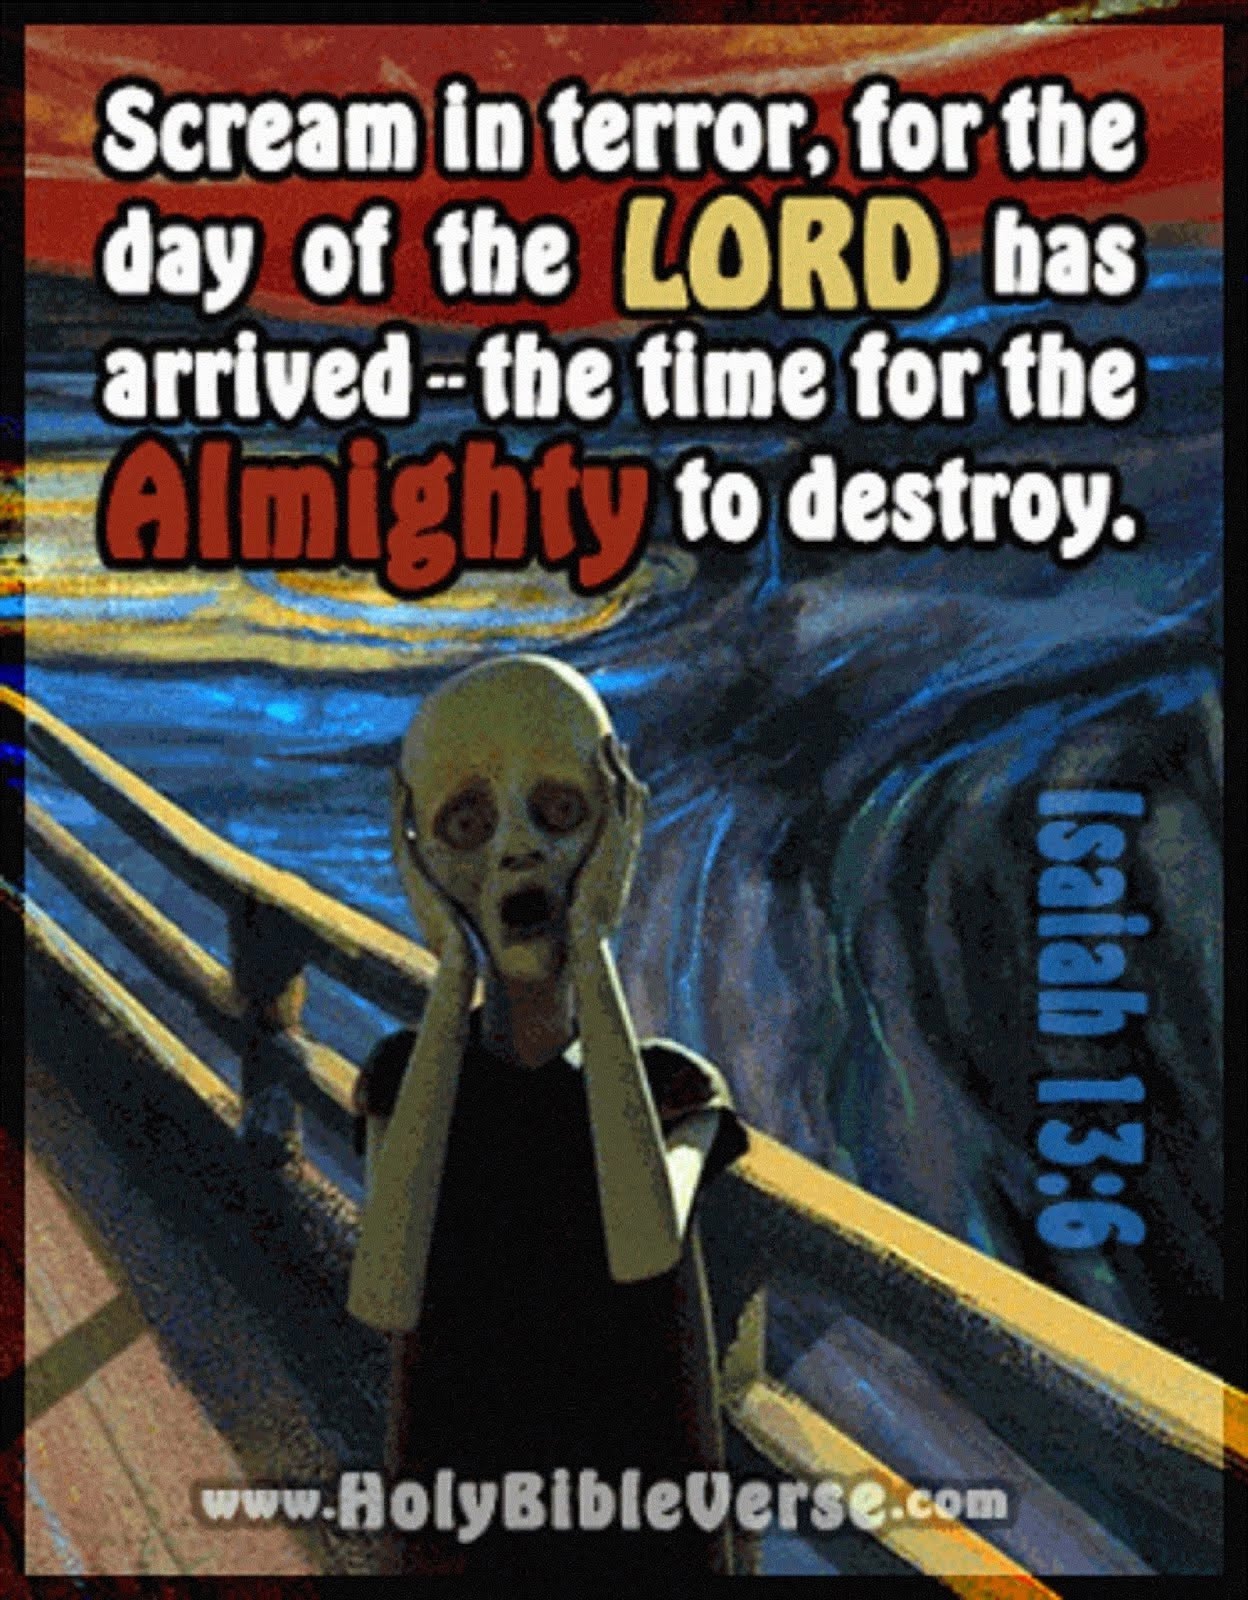 DAY OF THE LORD A TIME FOR THE LORD TO DESTROY